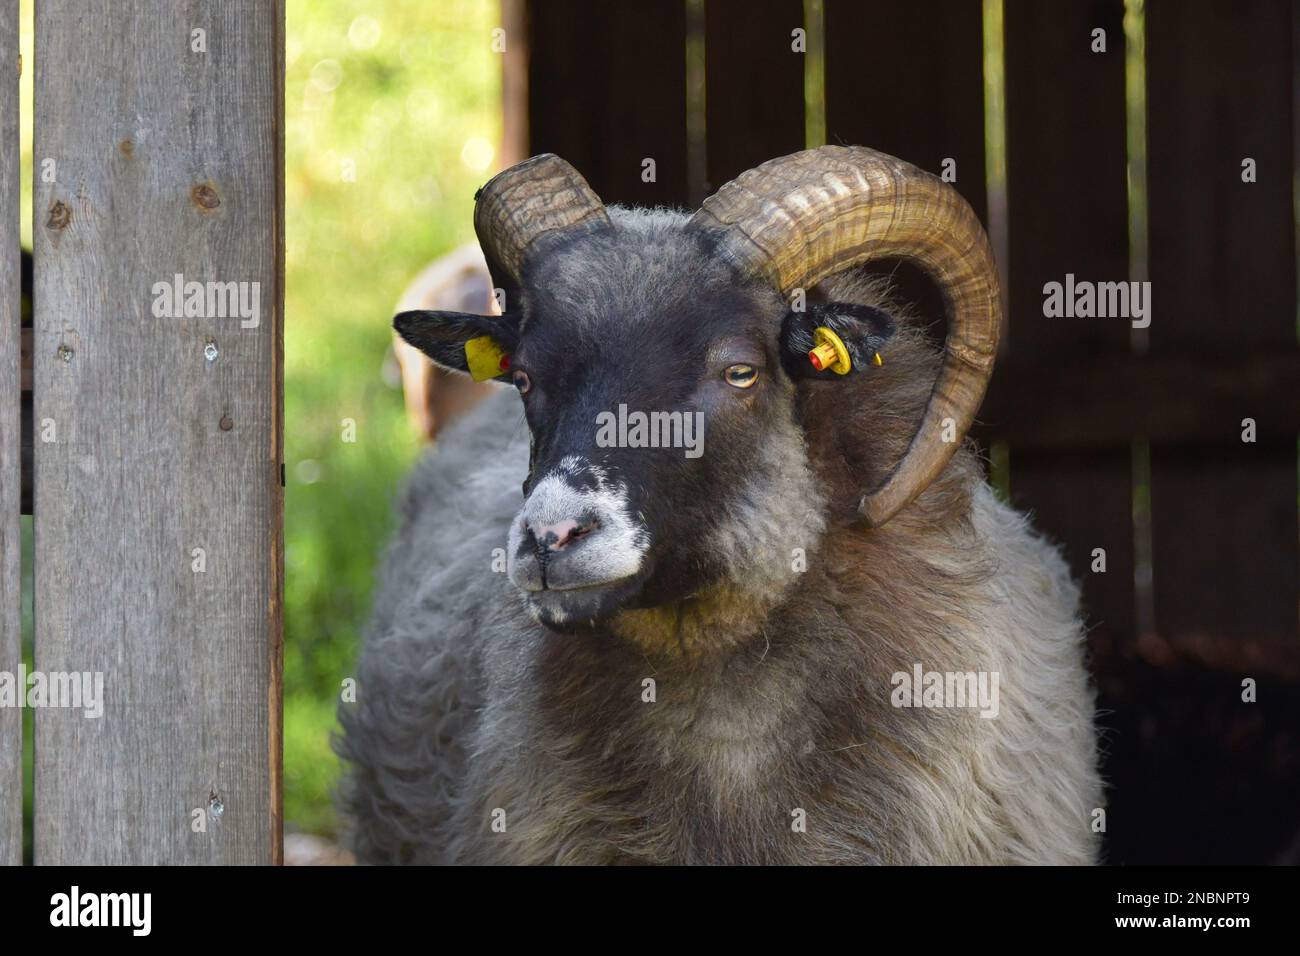 Portrait of a black and white Skudde sheep with horns looking out of its stable. Stock Photo